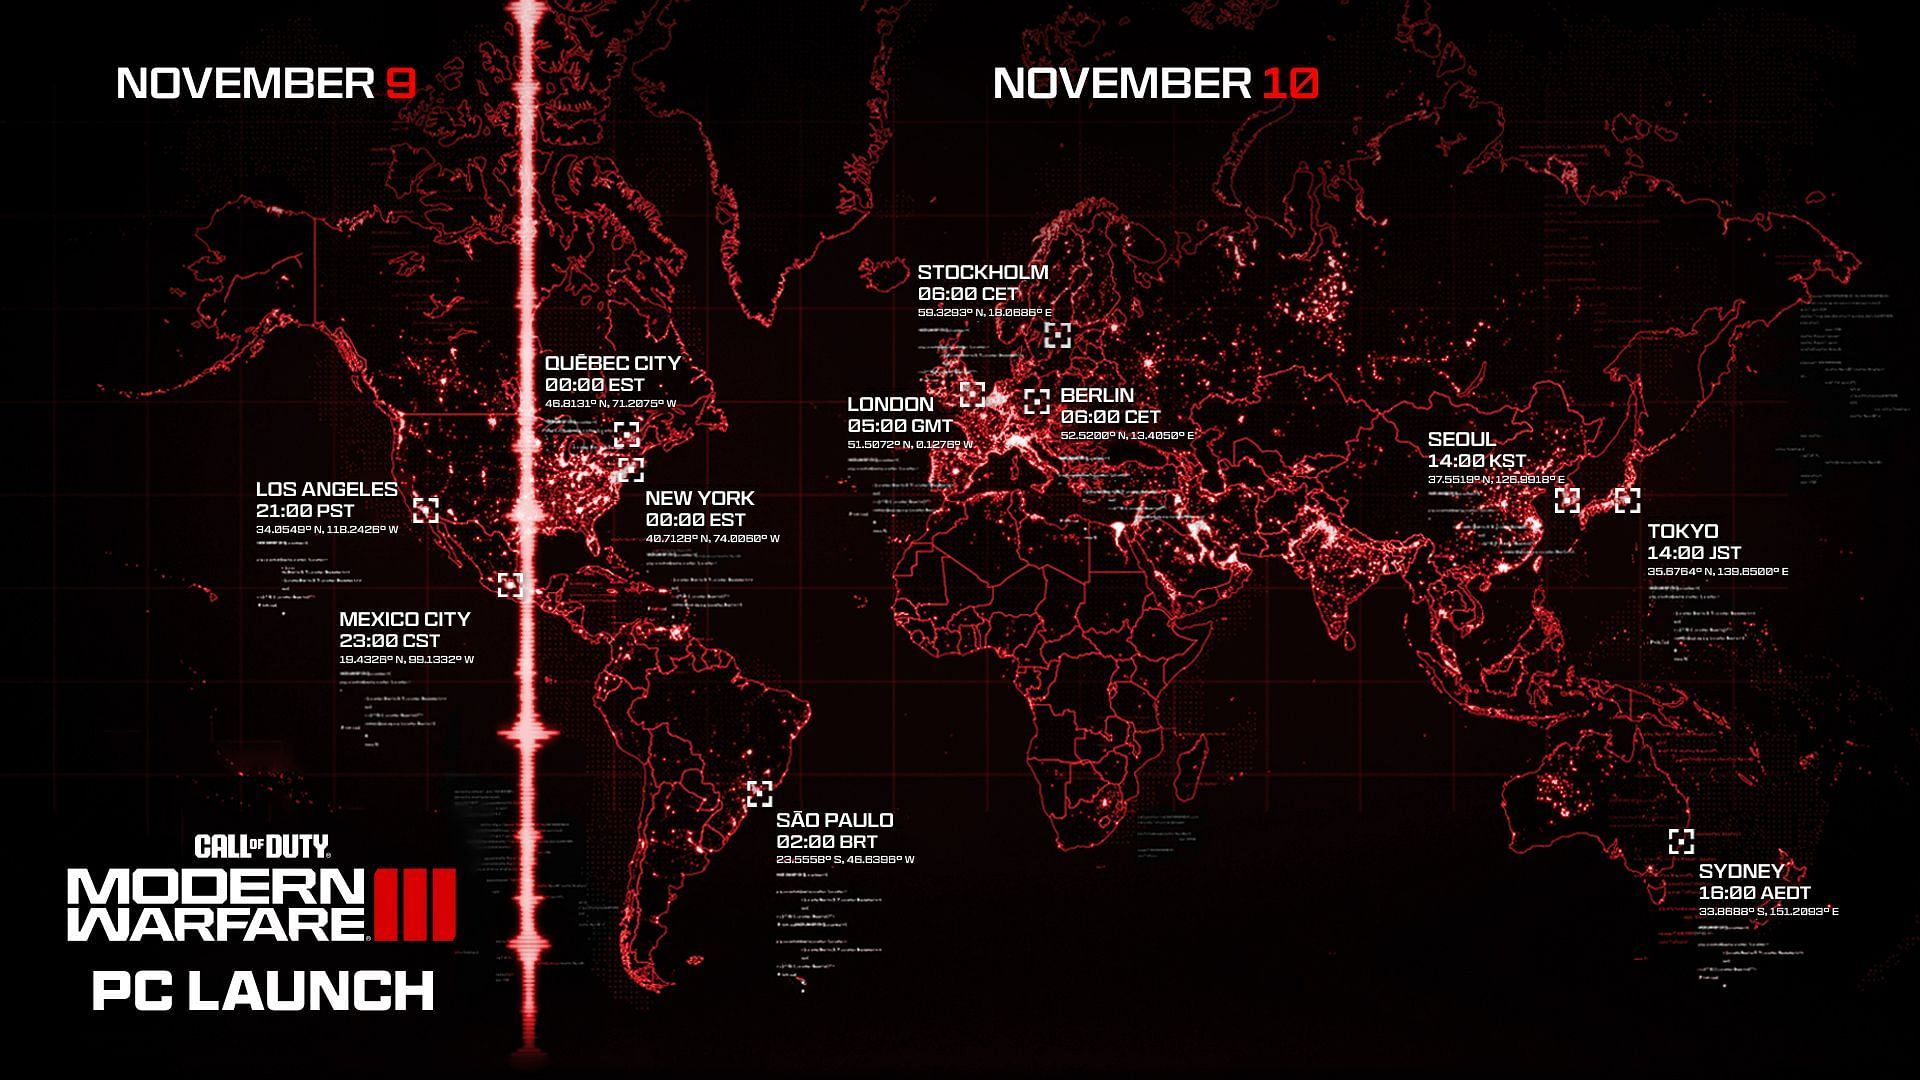 MW3 Zombies PC launch dates and times for various regions (Image via Activision)